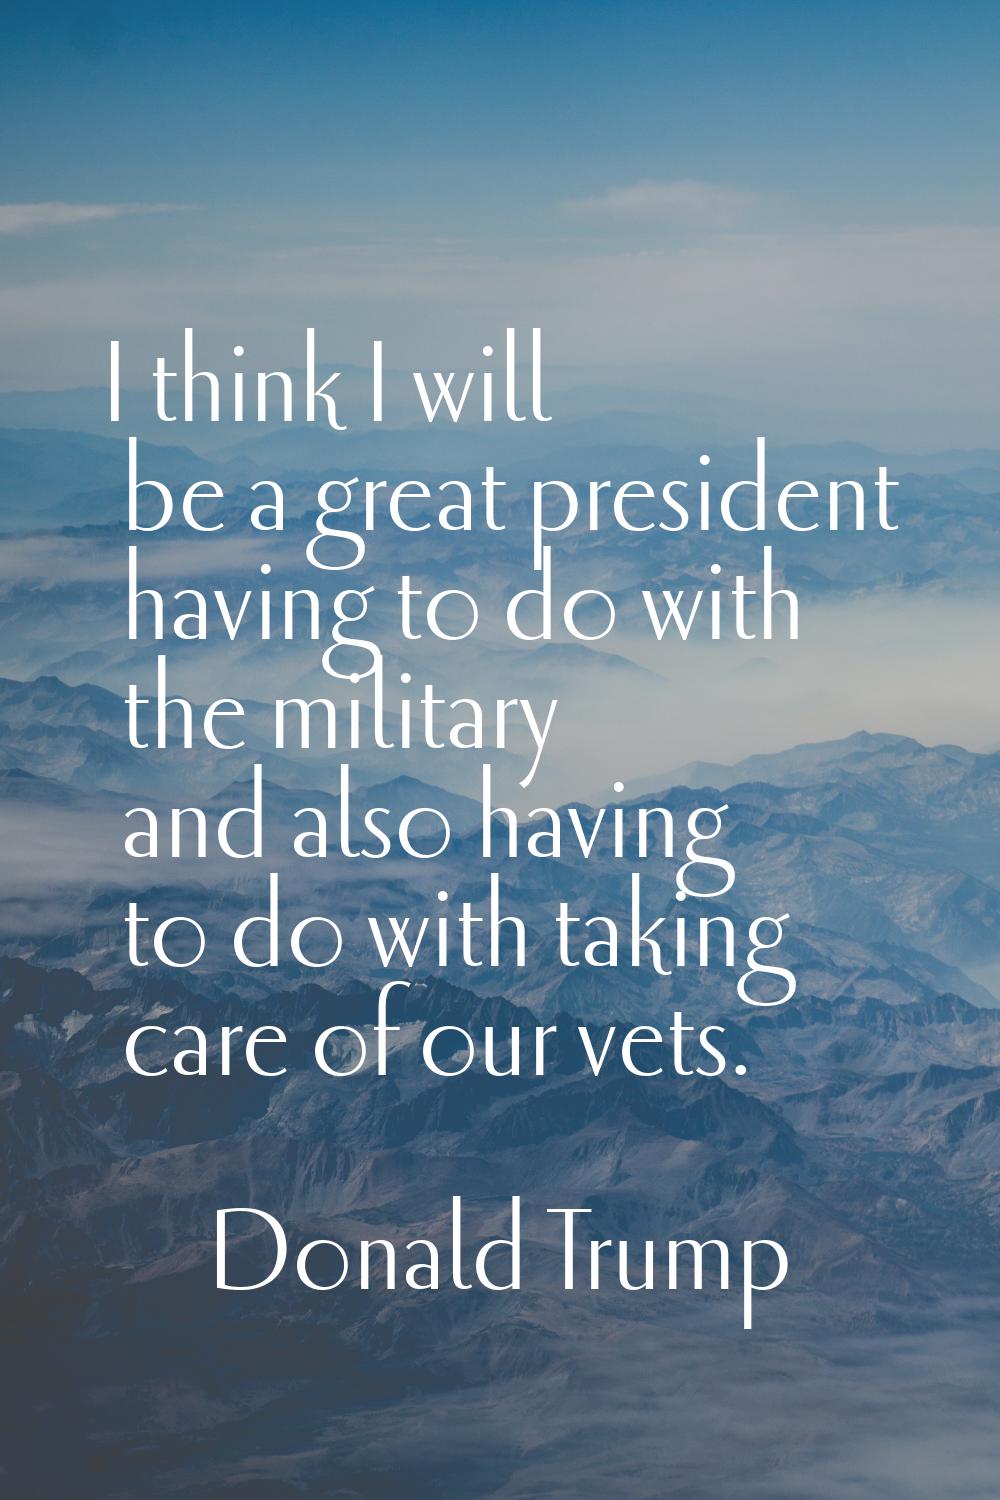 I think I will be a great president having to do with the military and also having to do with takin